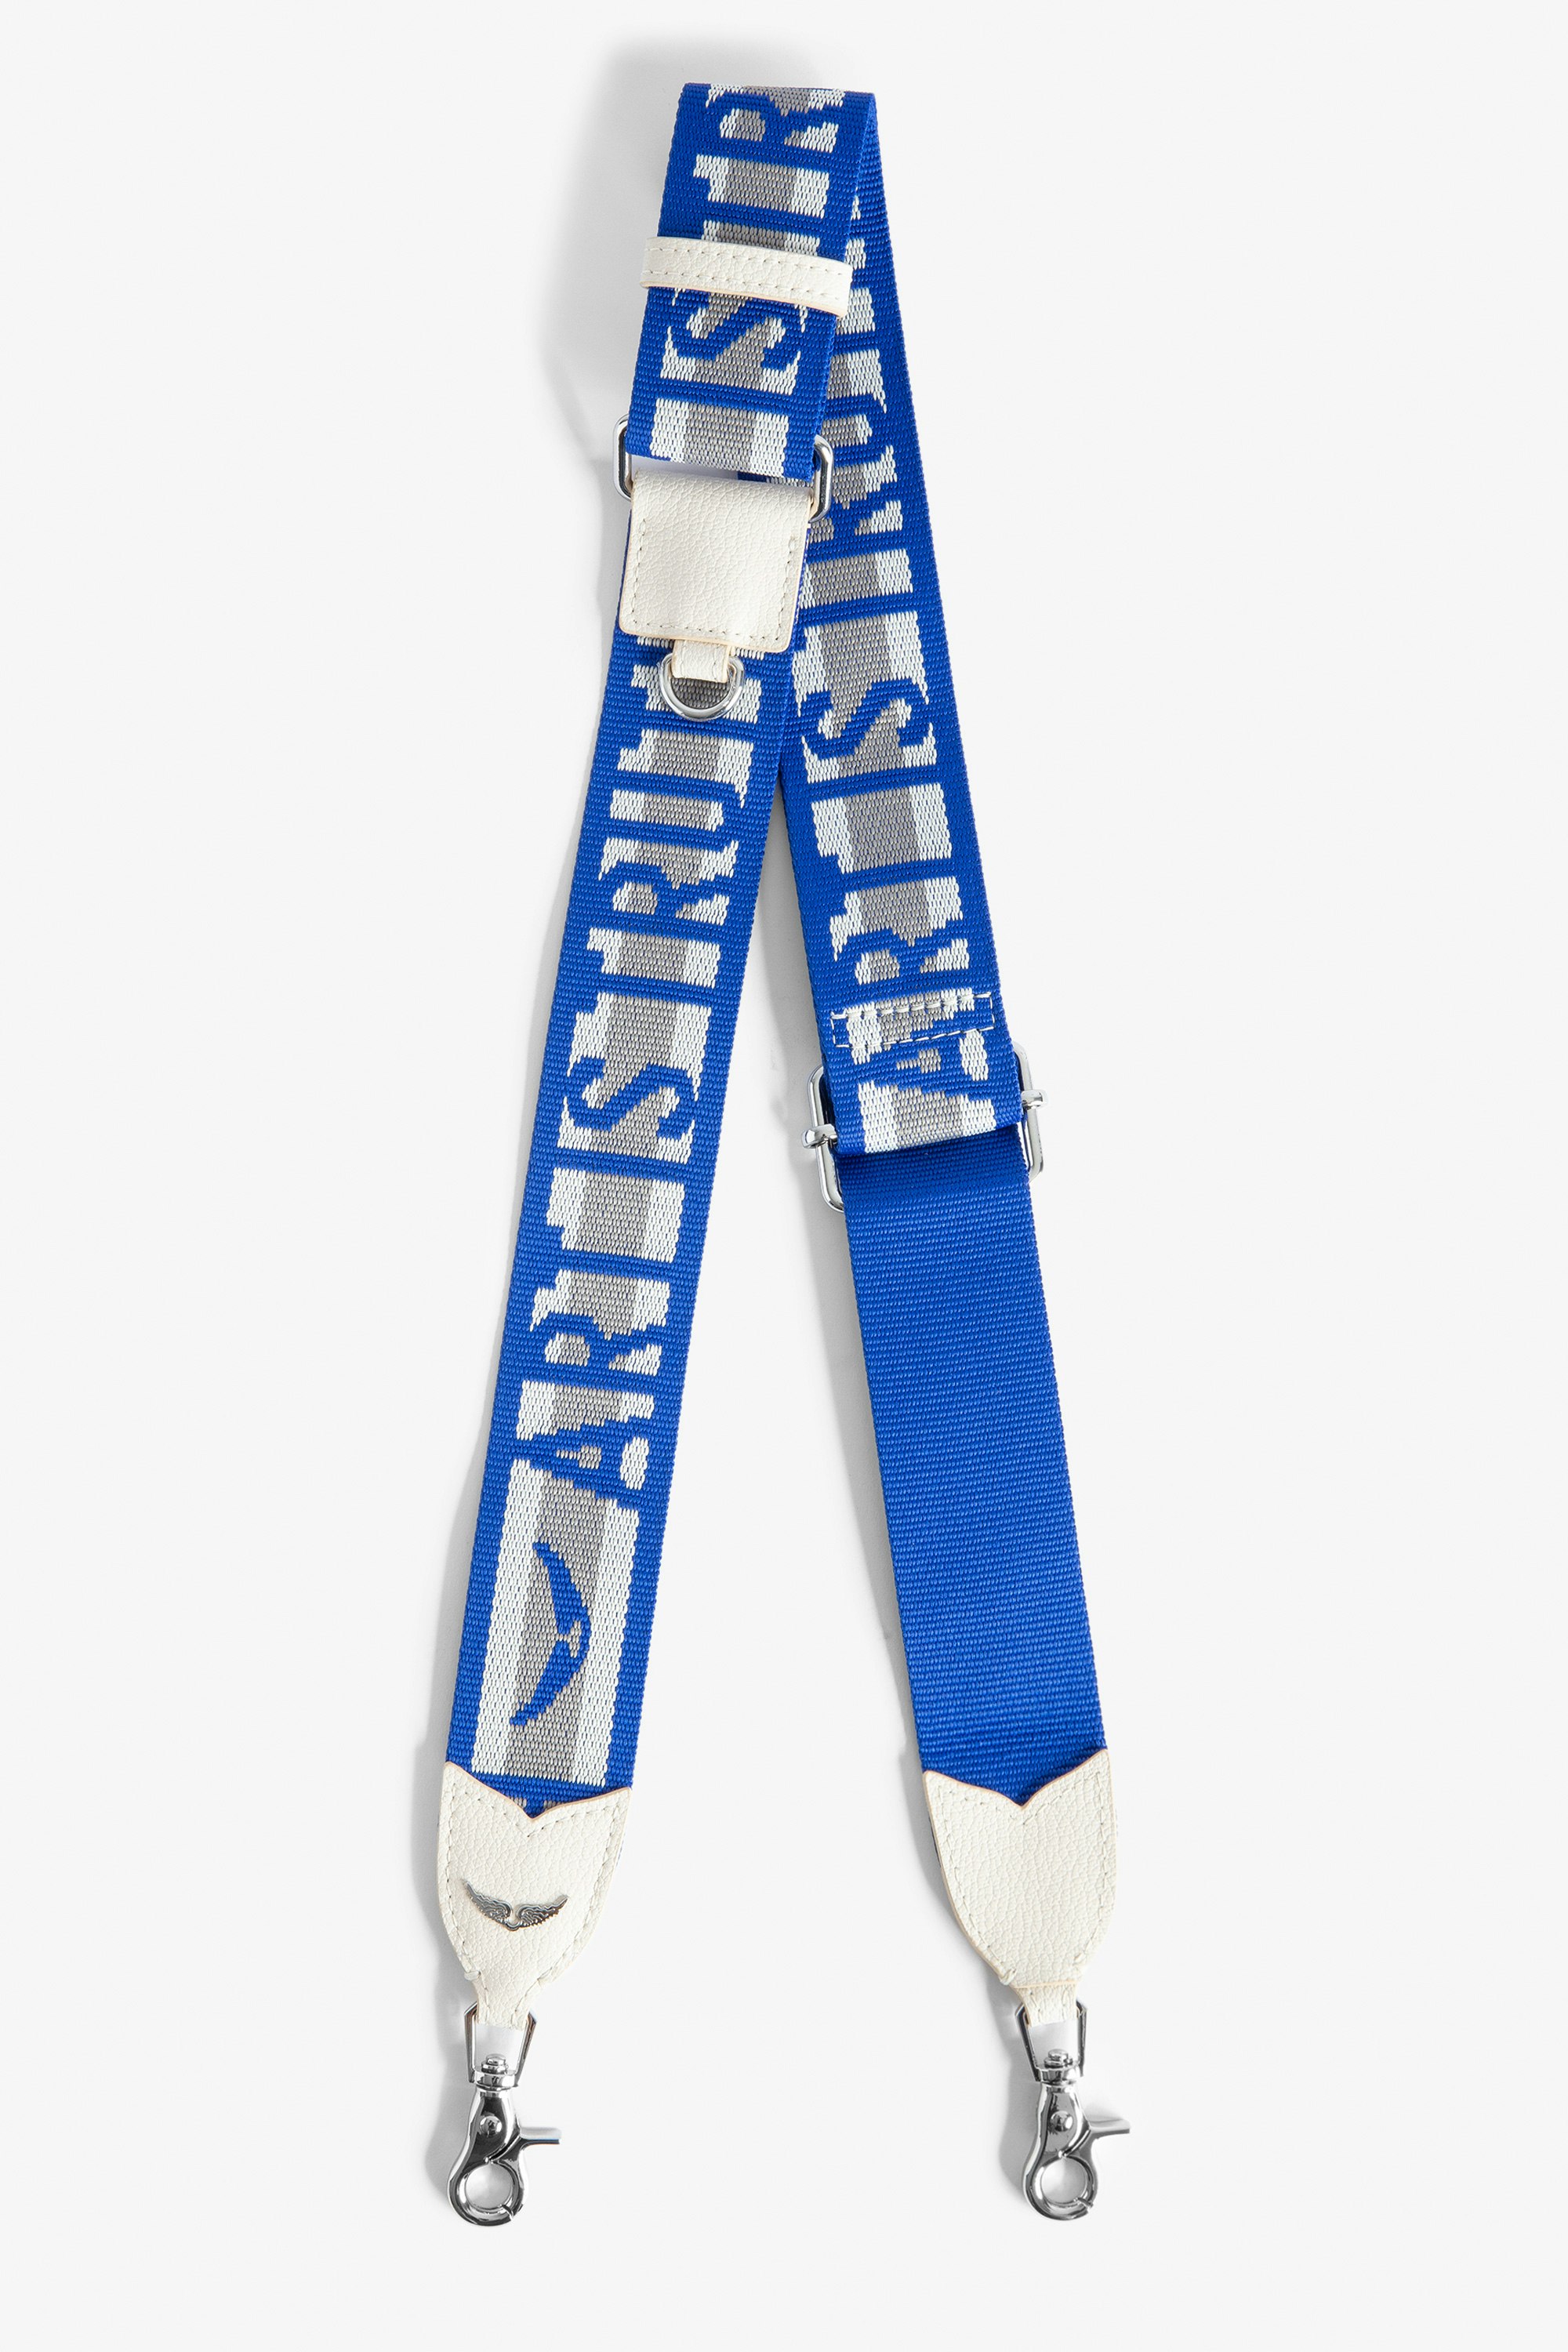 Zadig Shoulder Strap - Women’s blue leather and nylon shoulder strap with “Art is Truth” slogan and wings motif.